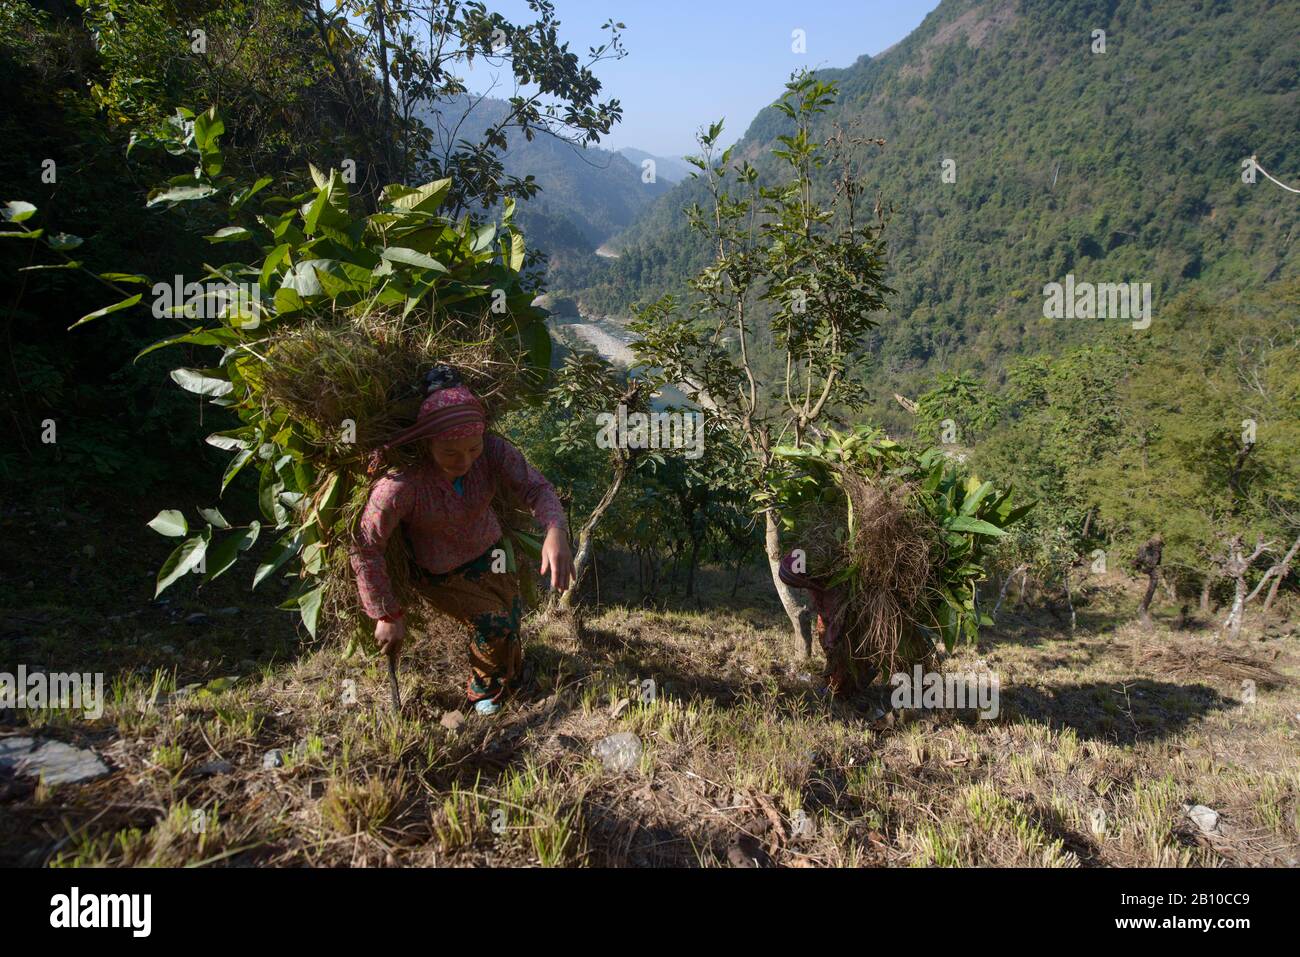 Village women carry tree branches in the front Himalayas, Nepal Stock Photo